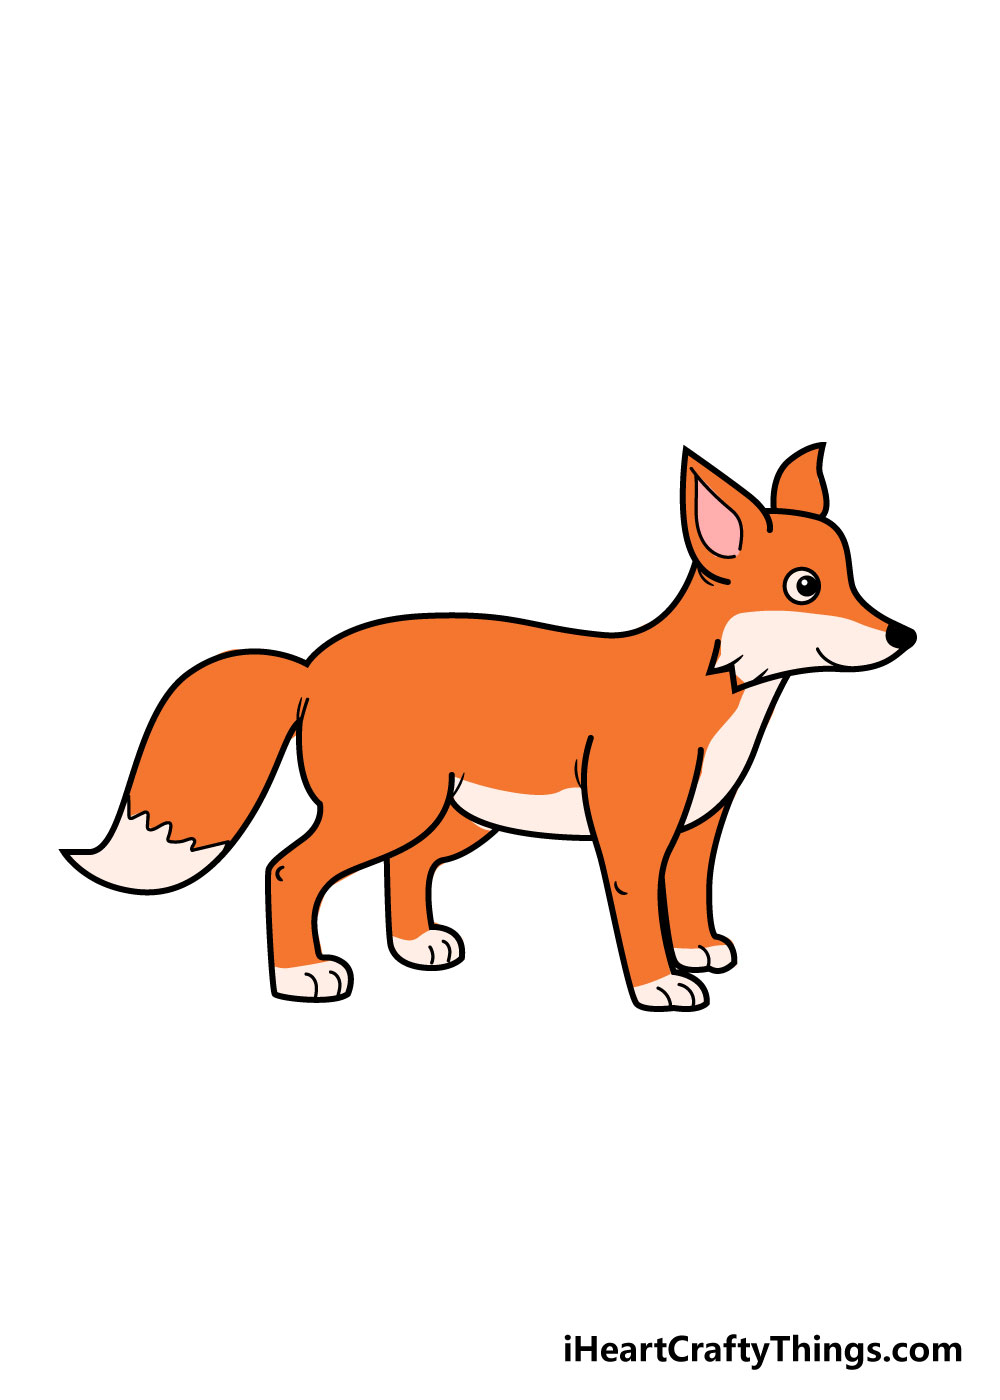 Top How To Draw Fox of the decade Learn more here 